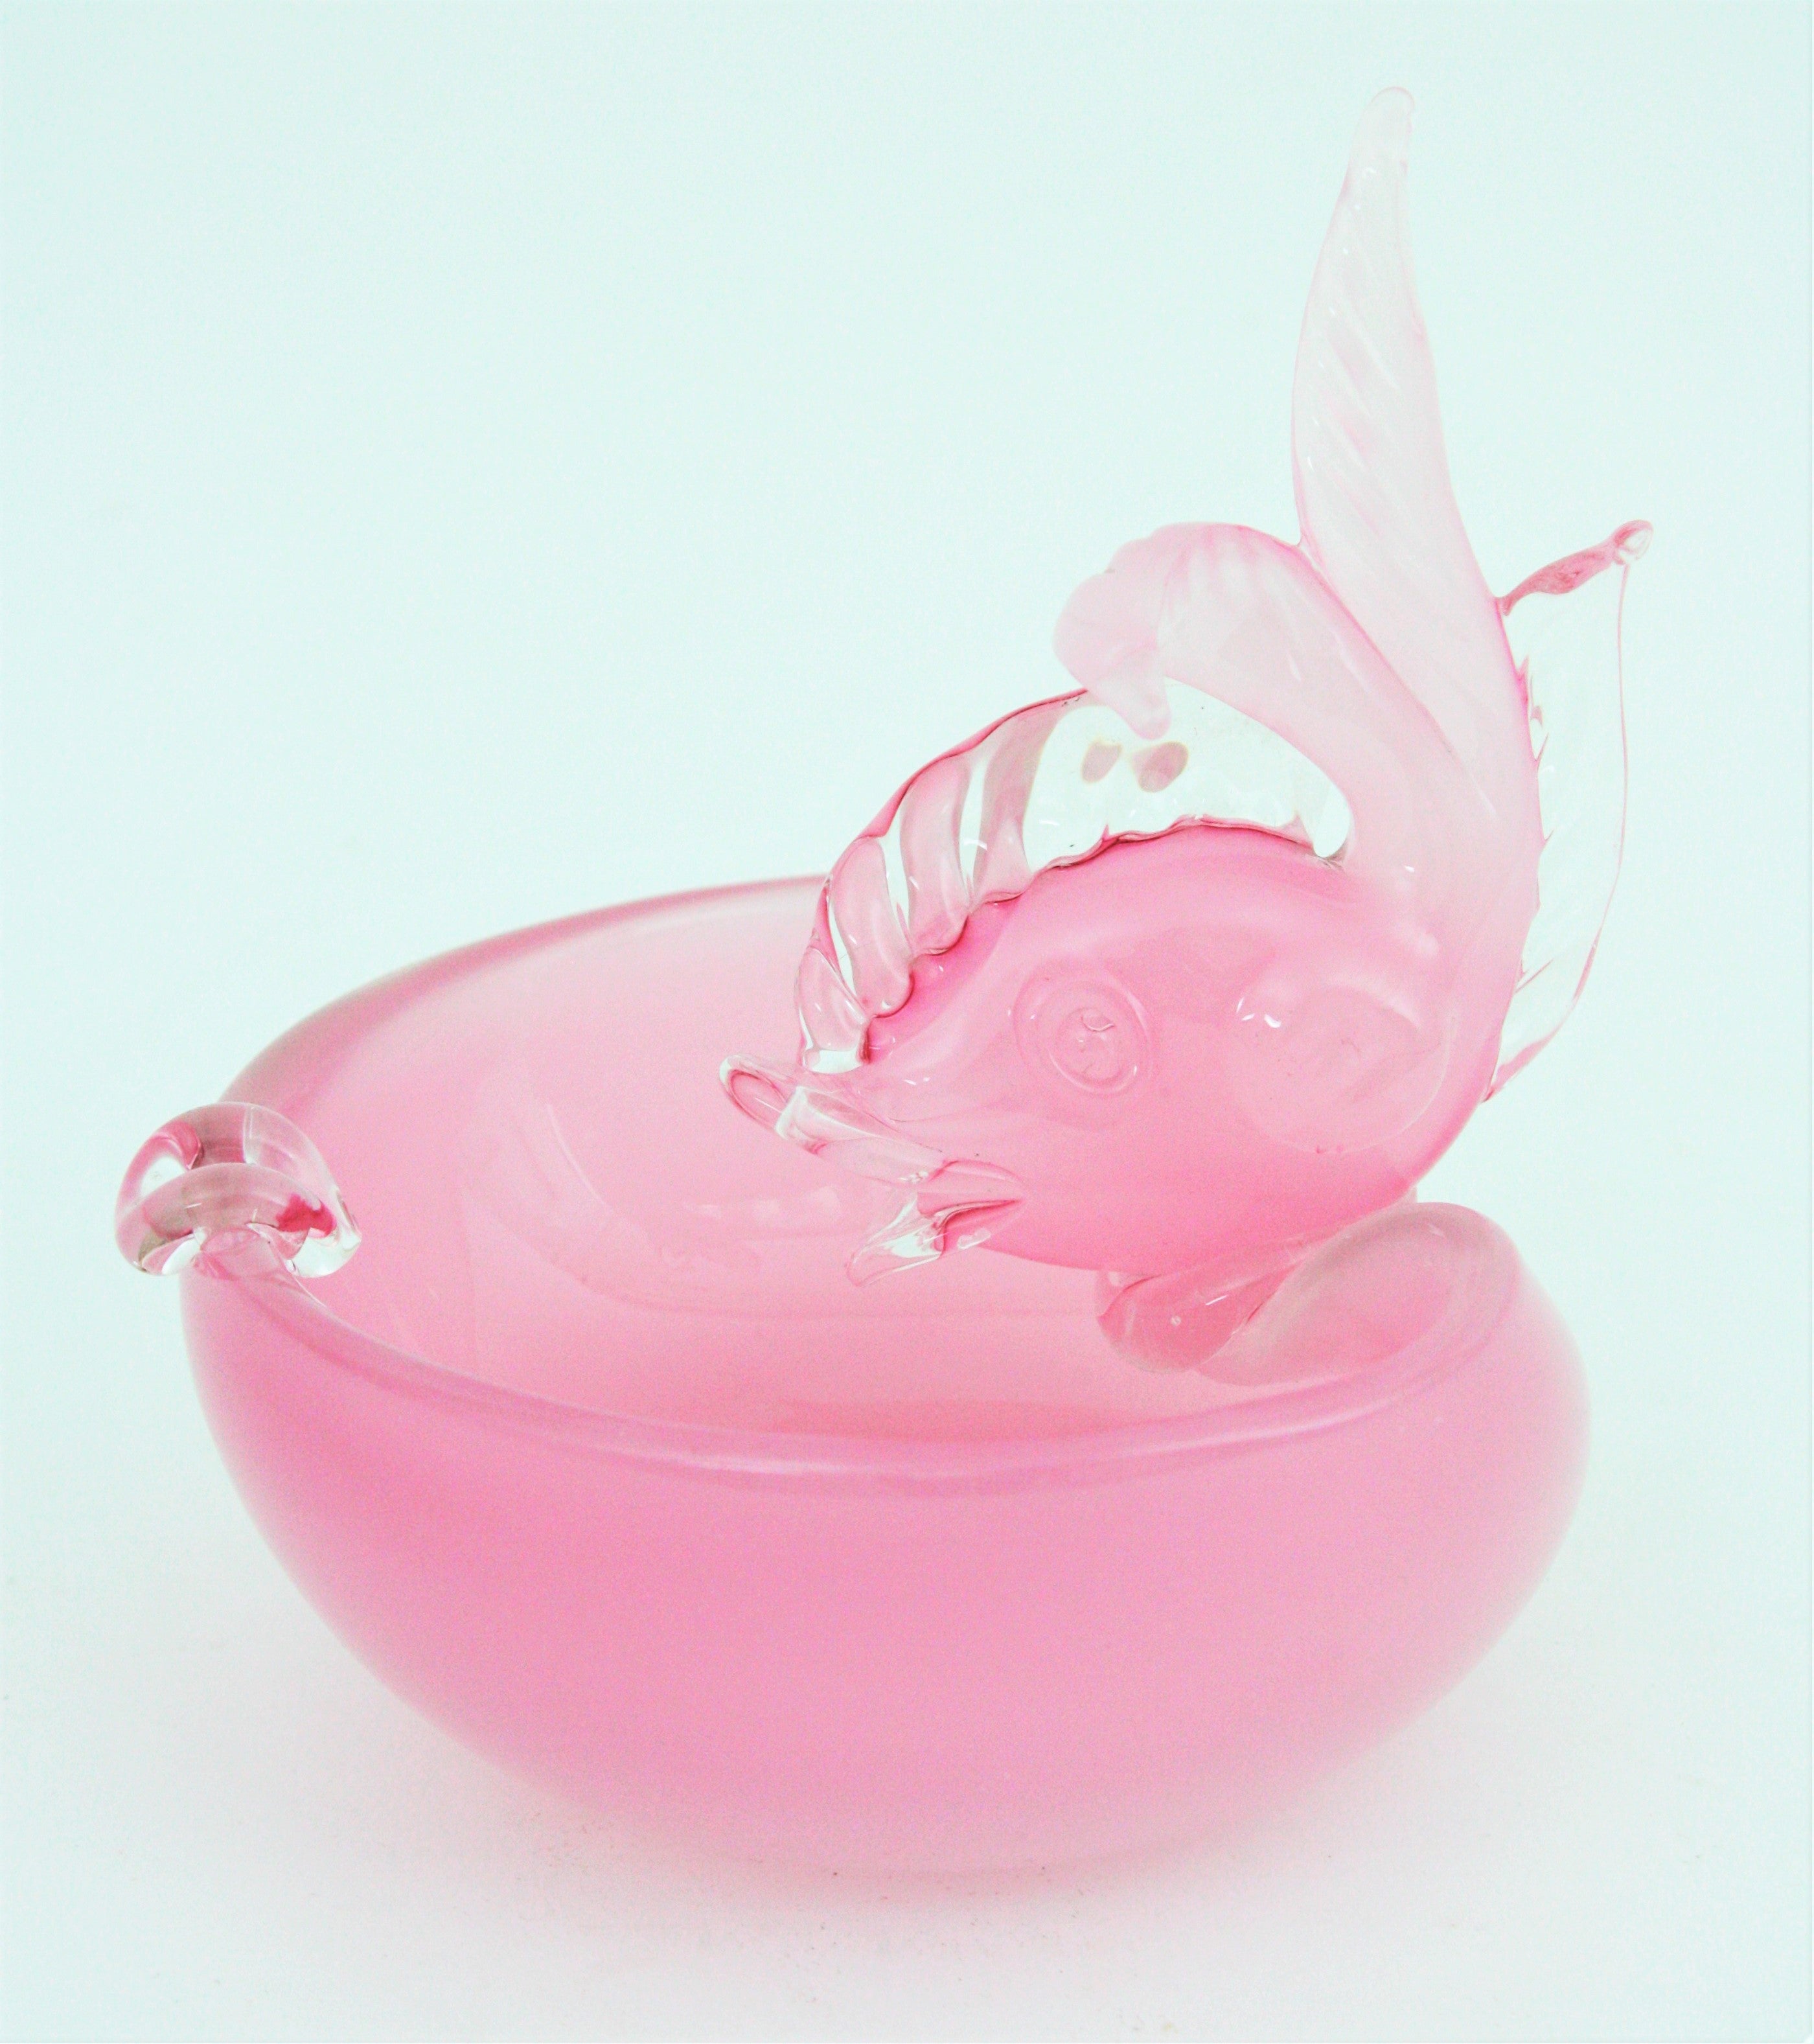 Lovely pink alabastro hand blown Murano glass ashtray or bowl with decorative fish figure. Attributed to Archimede Seguso, Italy, 1950s.
This ashtray is finely executed in opalescent pink and clear glass.
Elegant shape and design, this art glass